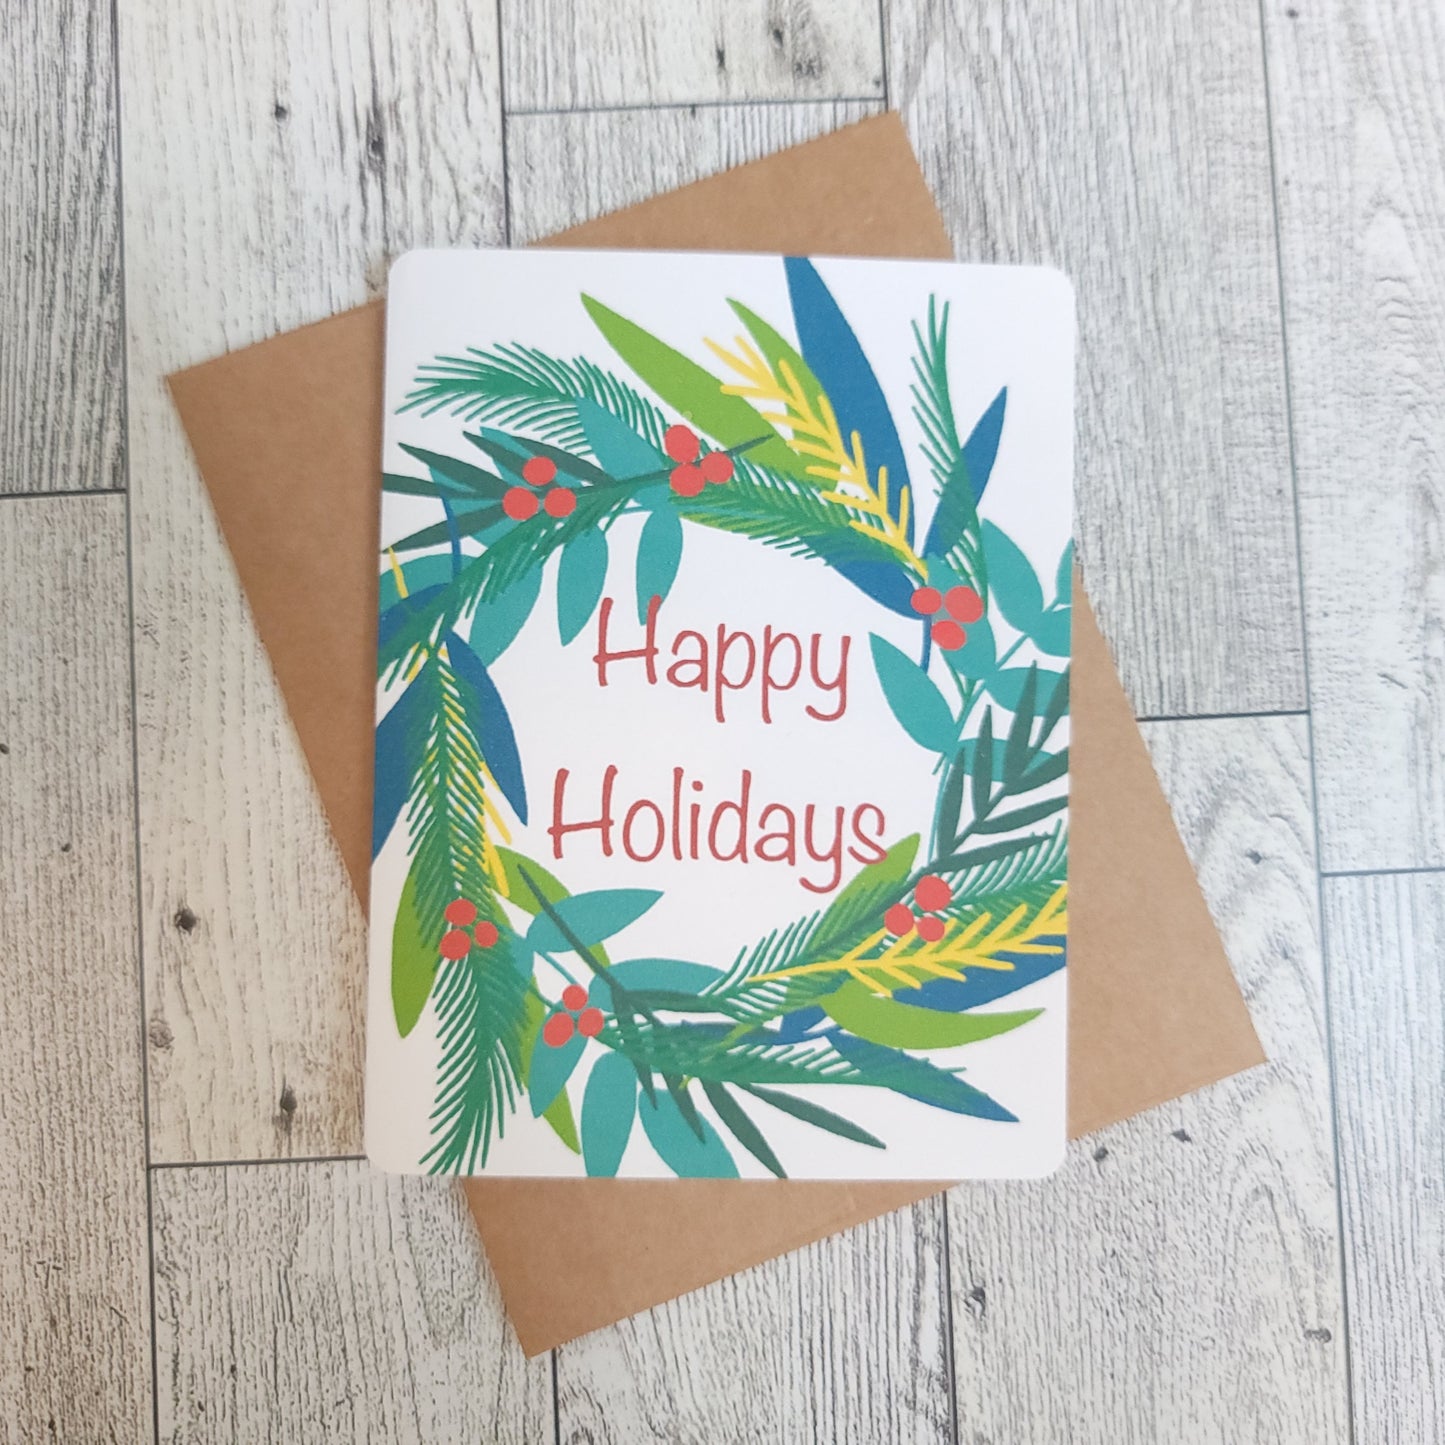 Happy Holidays Wreath Handmade Greeting Card - Recycled Paper and Kraft Envelop - Overhead Shot